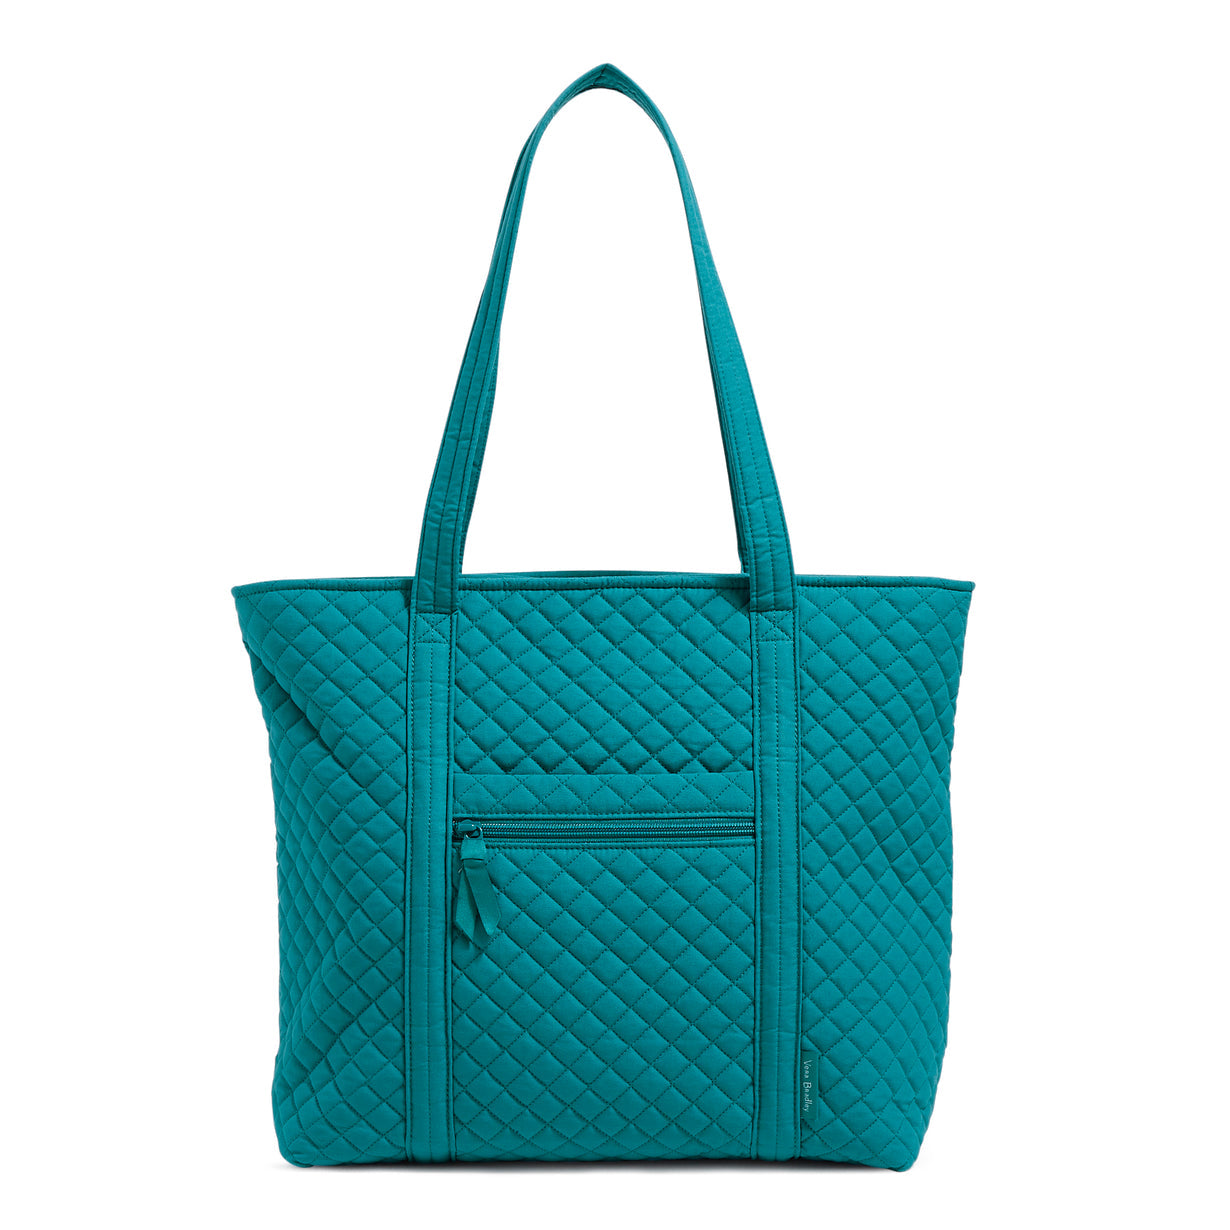 A Vera Tote bag in Forever Green pattern.